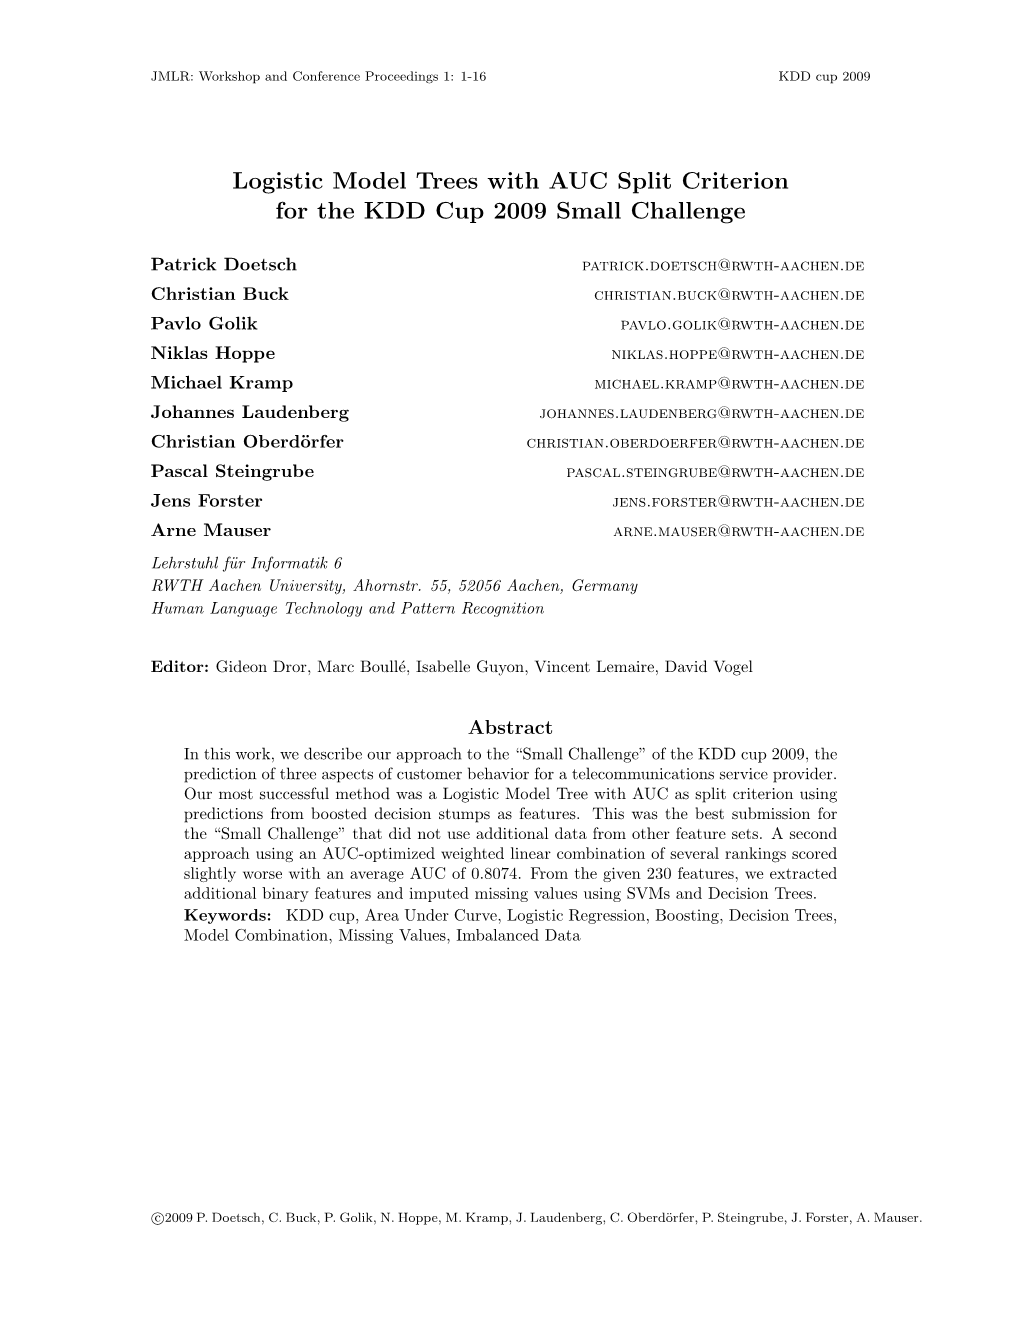 Logistic Model Trees with AUC Split Criterion for the KDD Cup 2009 Small Challenge